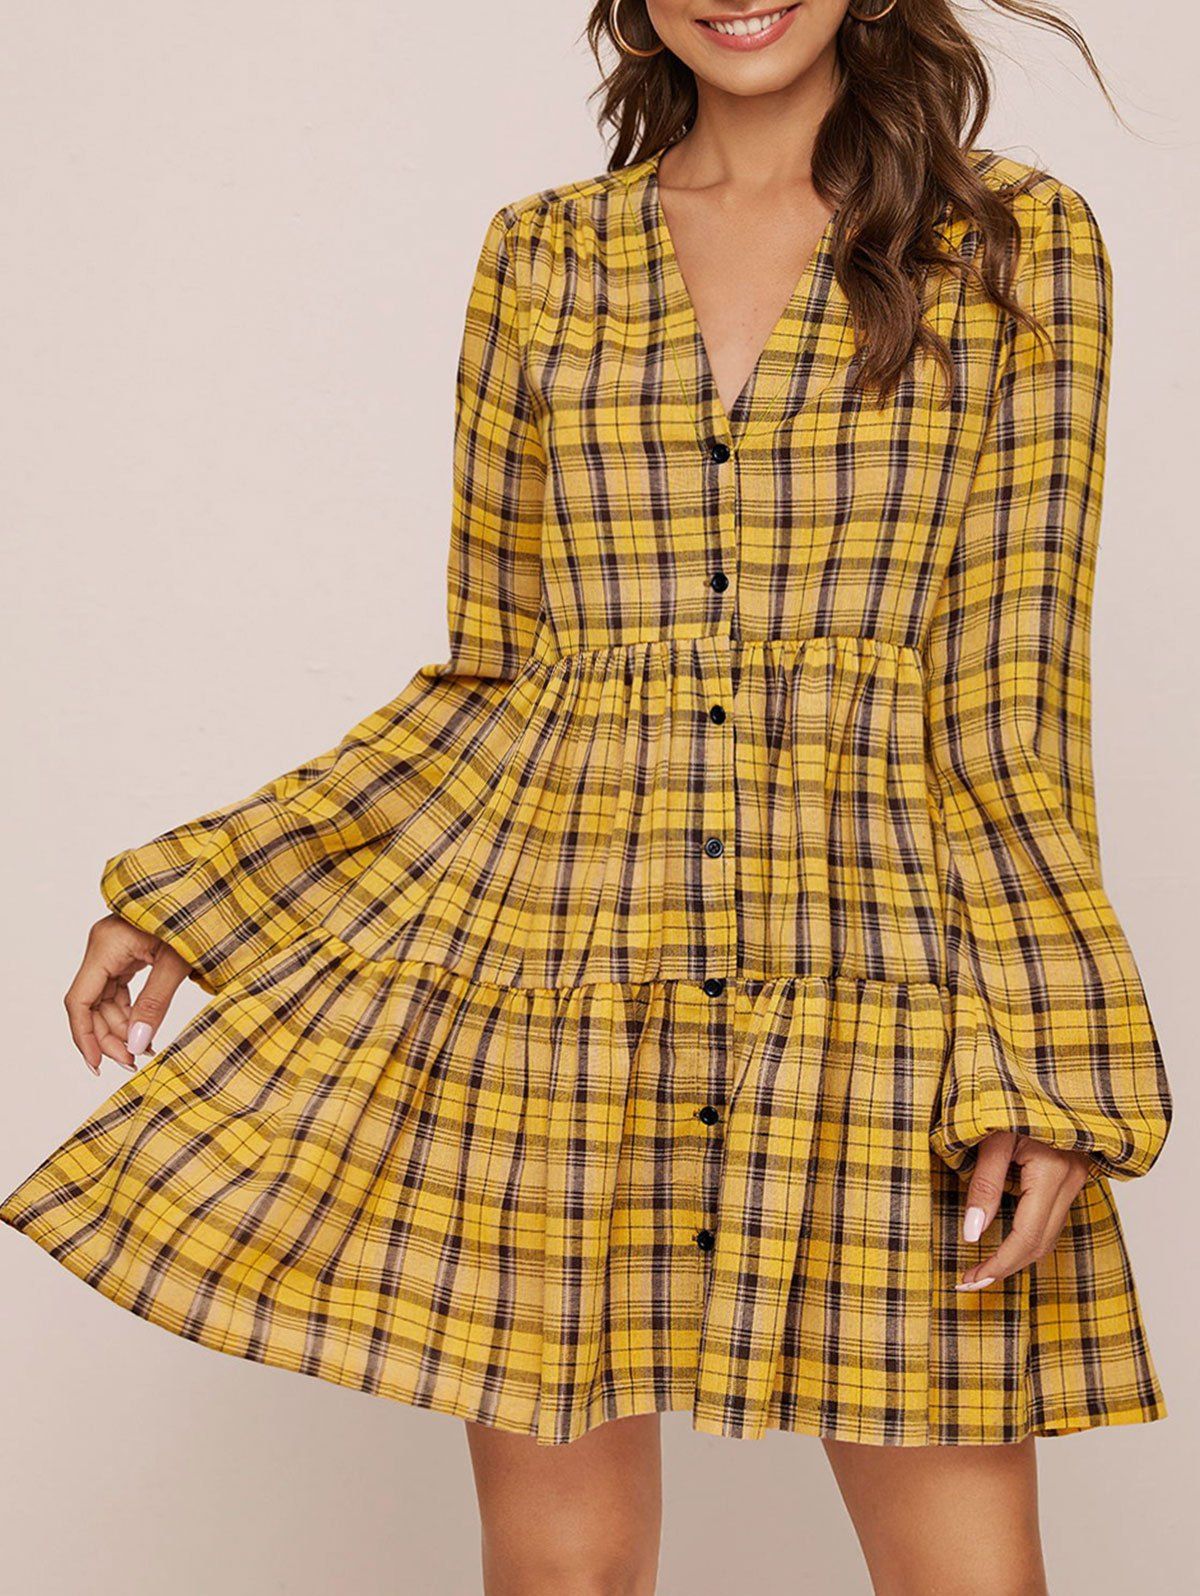 Plaid Button Up Tiered Dress - YELLOW S